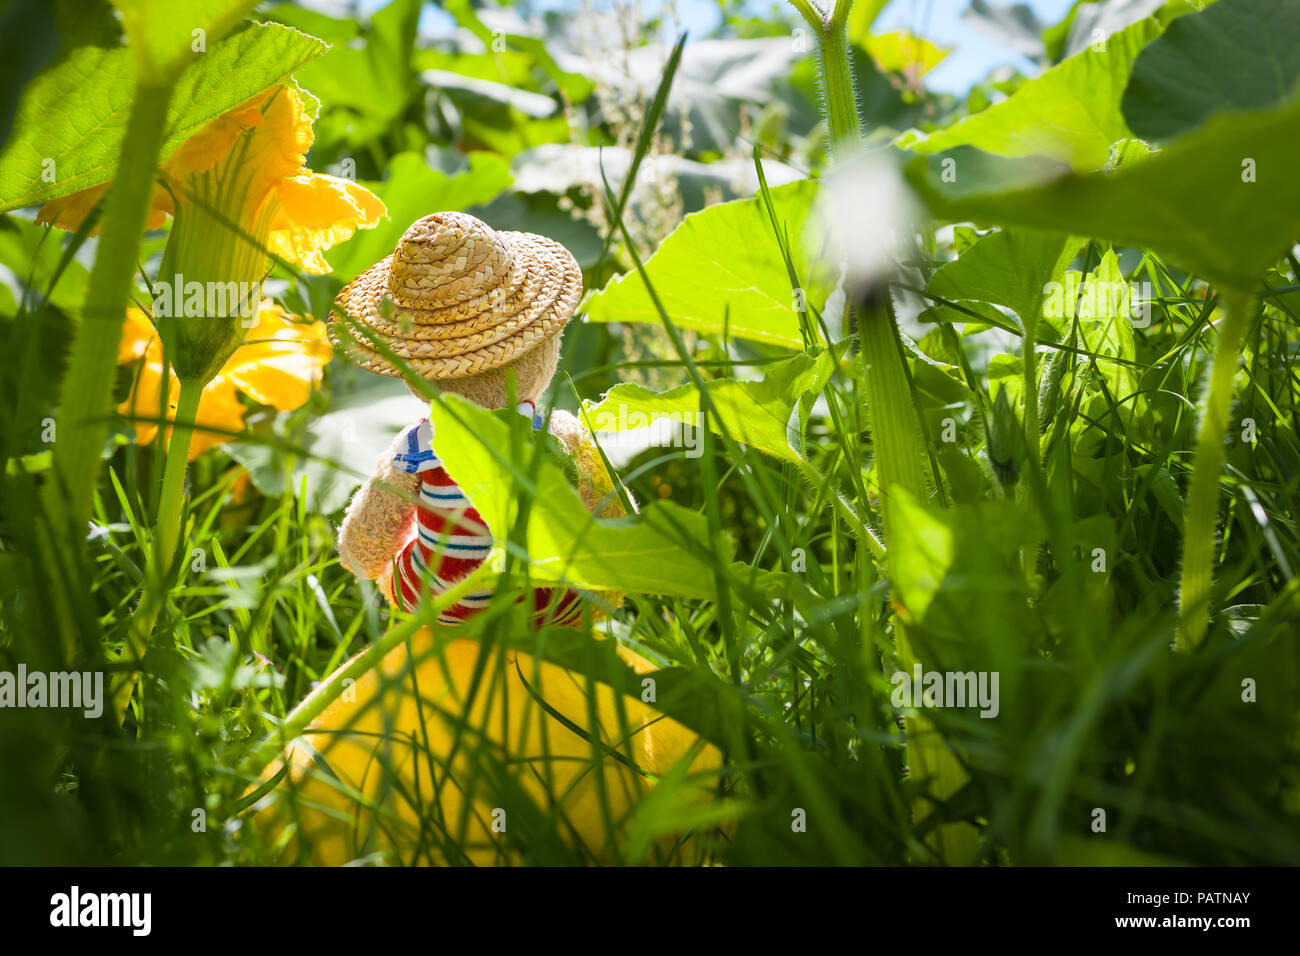 Rear view of cute dreamy little teddy bear, sitting with sailor suit and sun hat at top of pumpkin in summery big garden jungle between tall plants Stock Photo